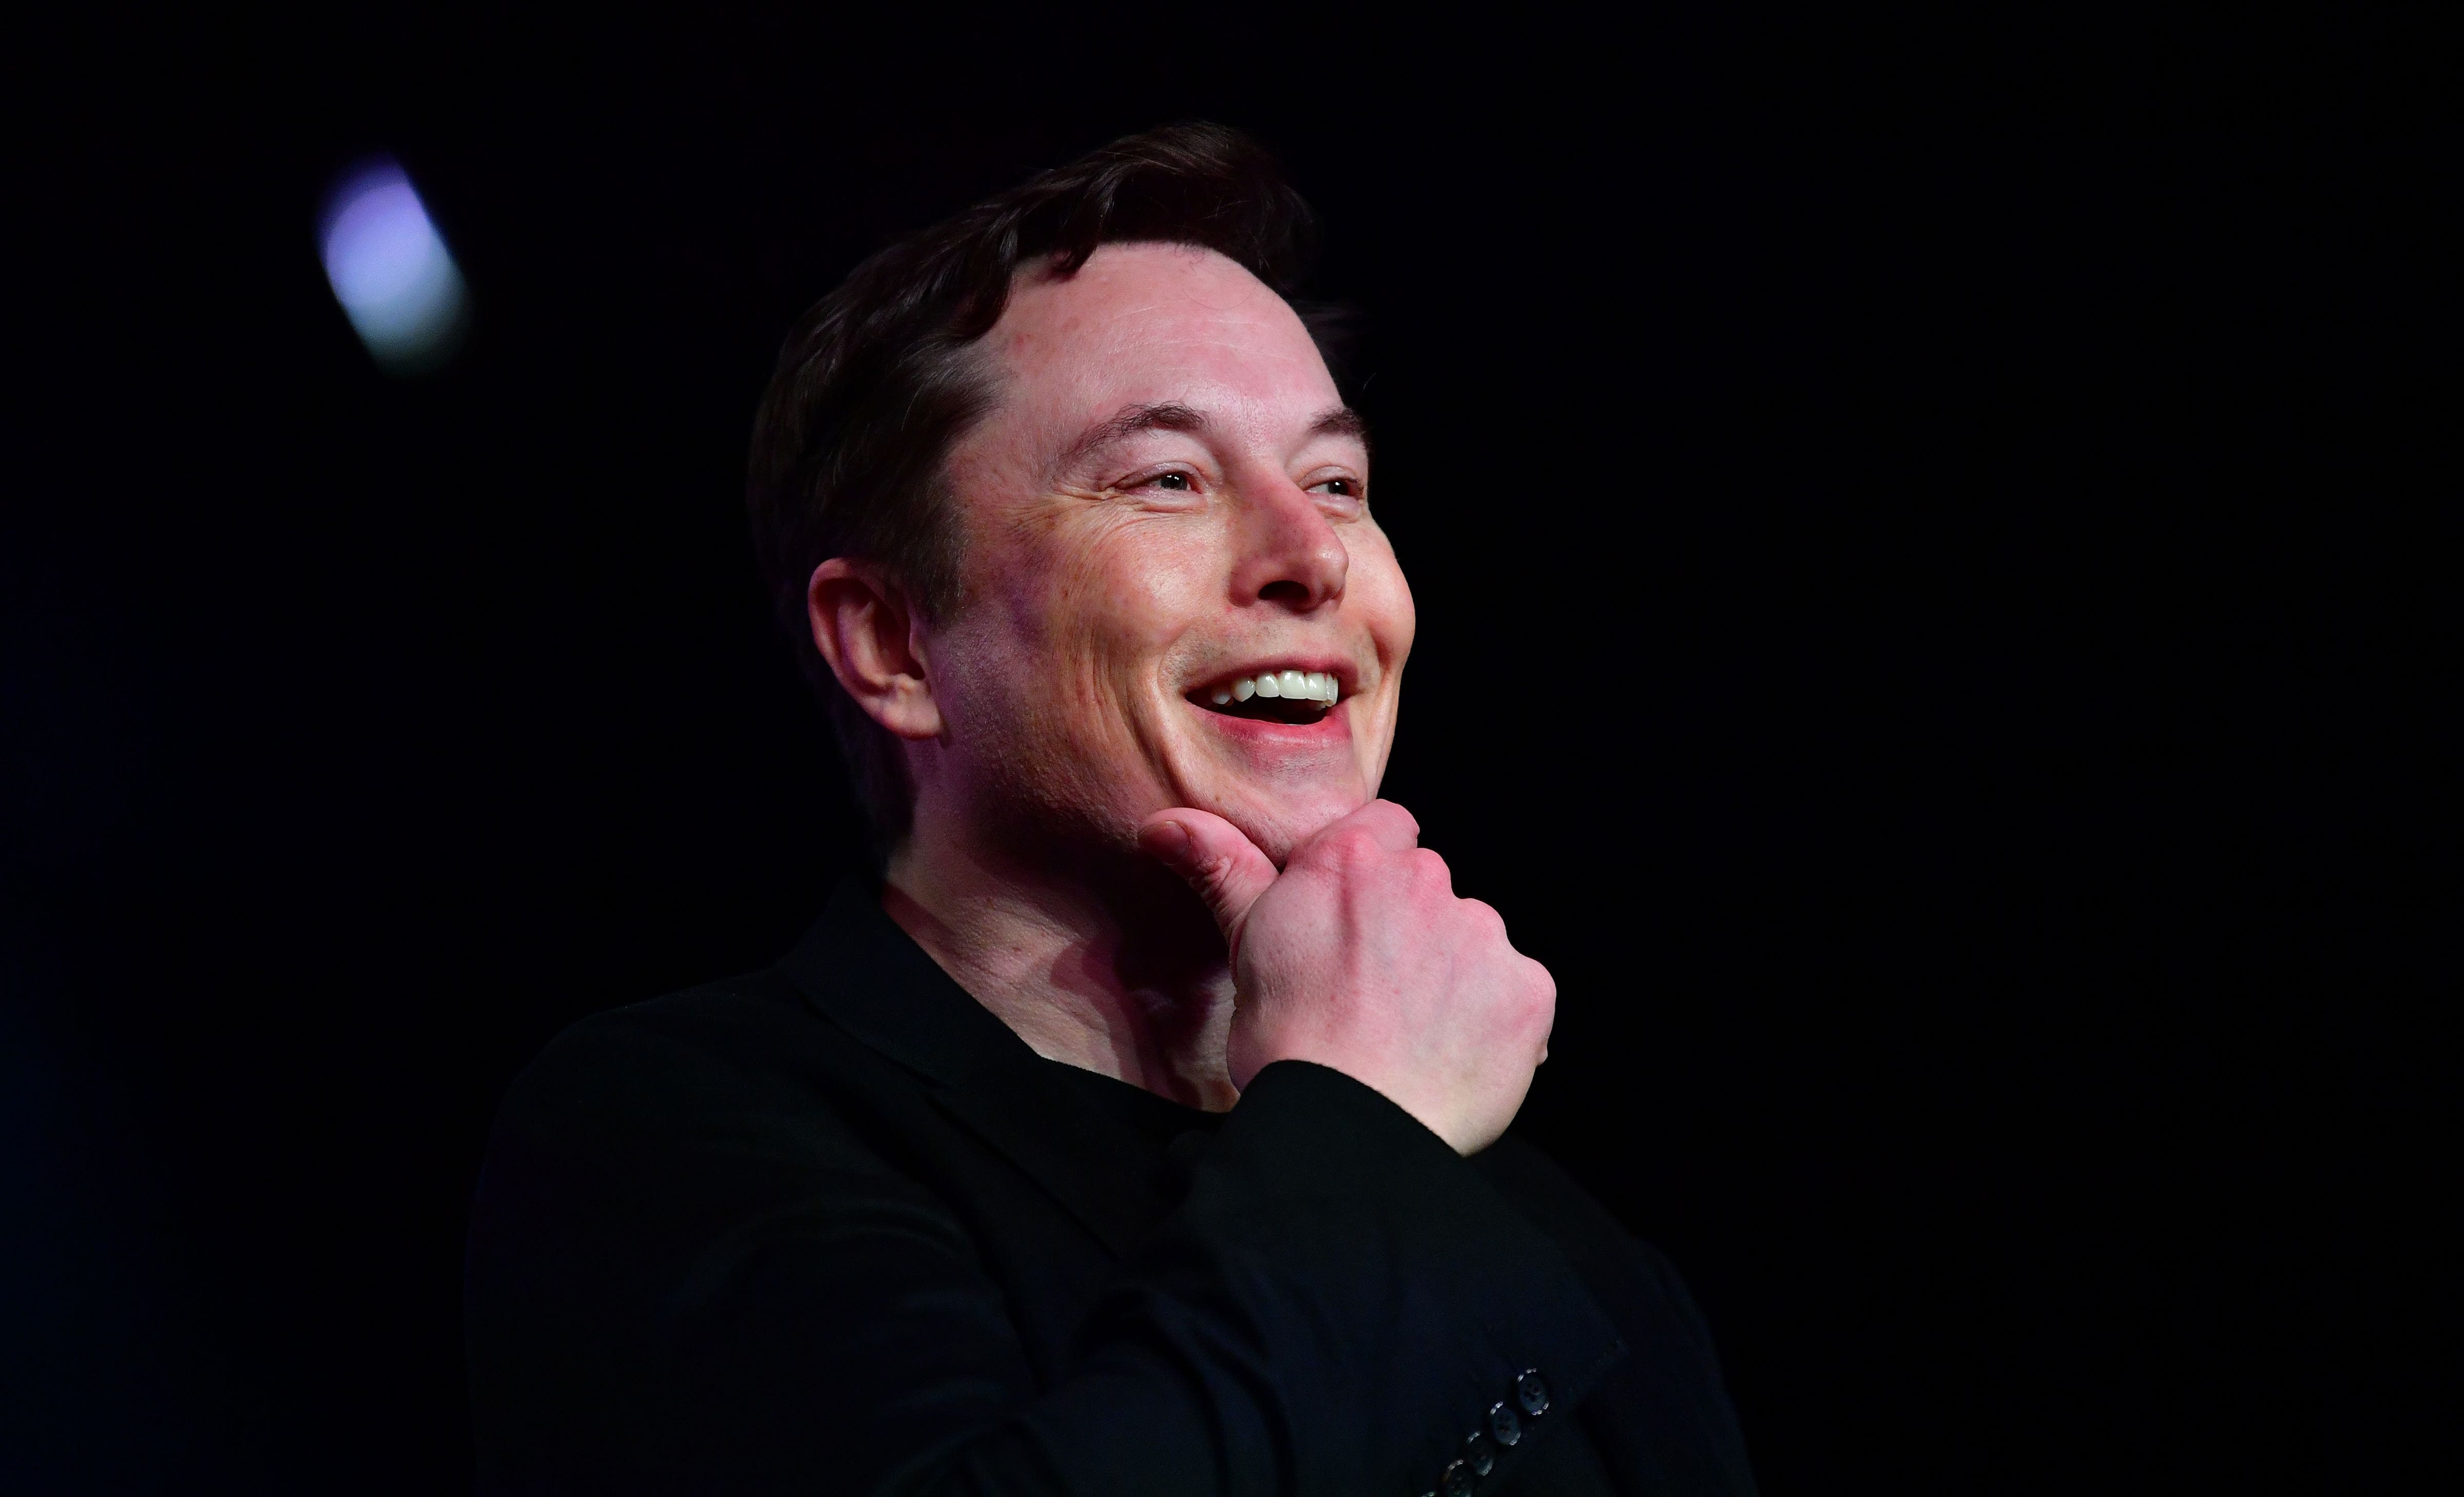 Twitter users suggest what Elon Musk 'should buy next,' including Disney, History Channel